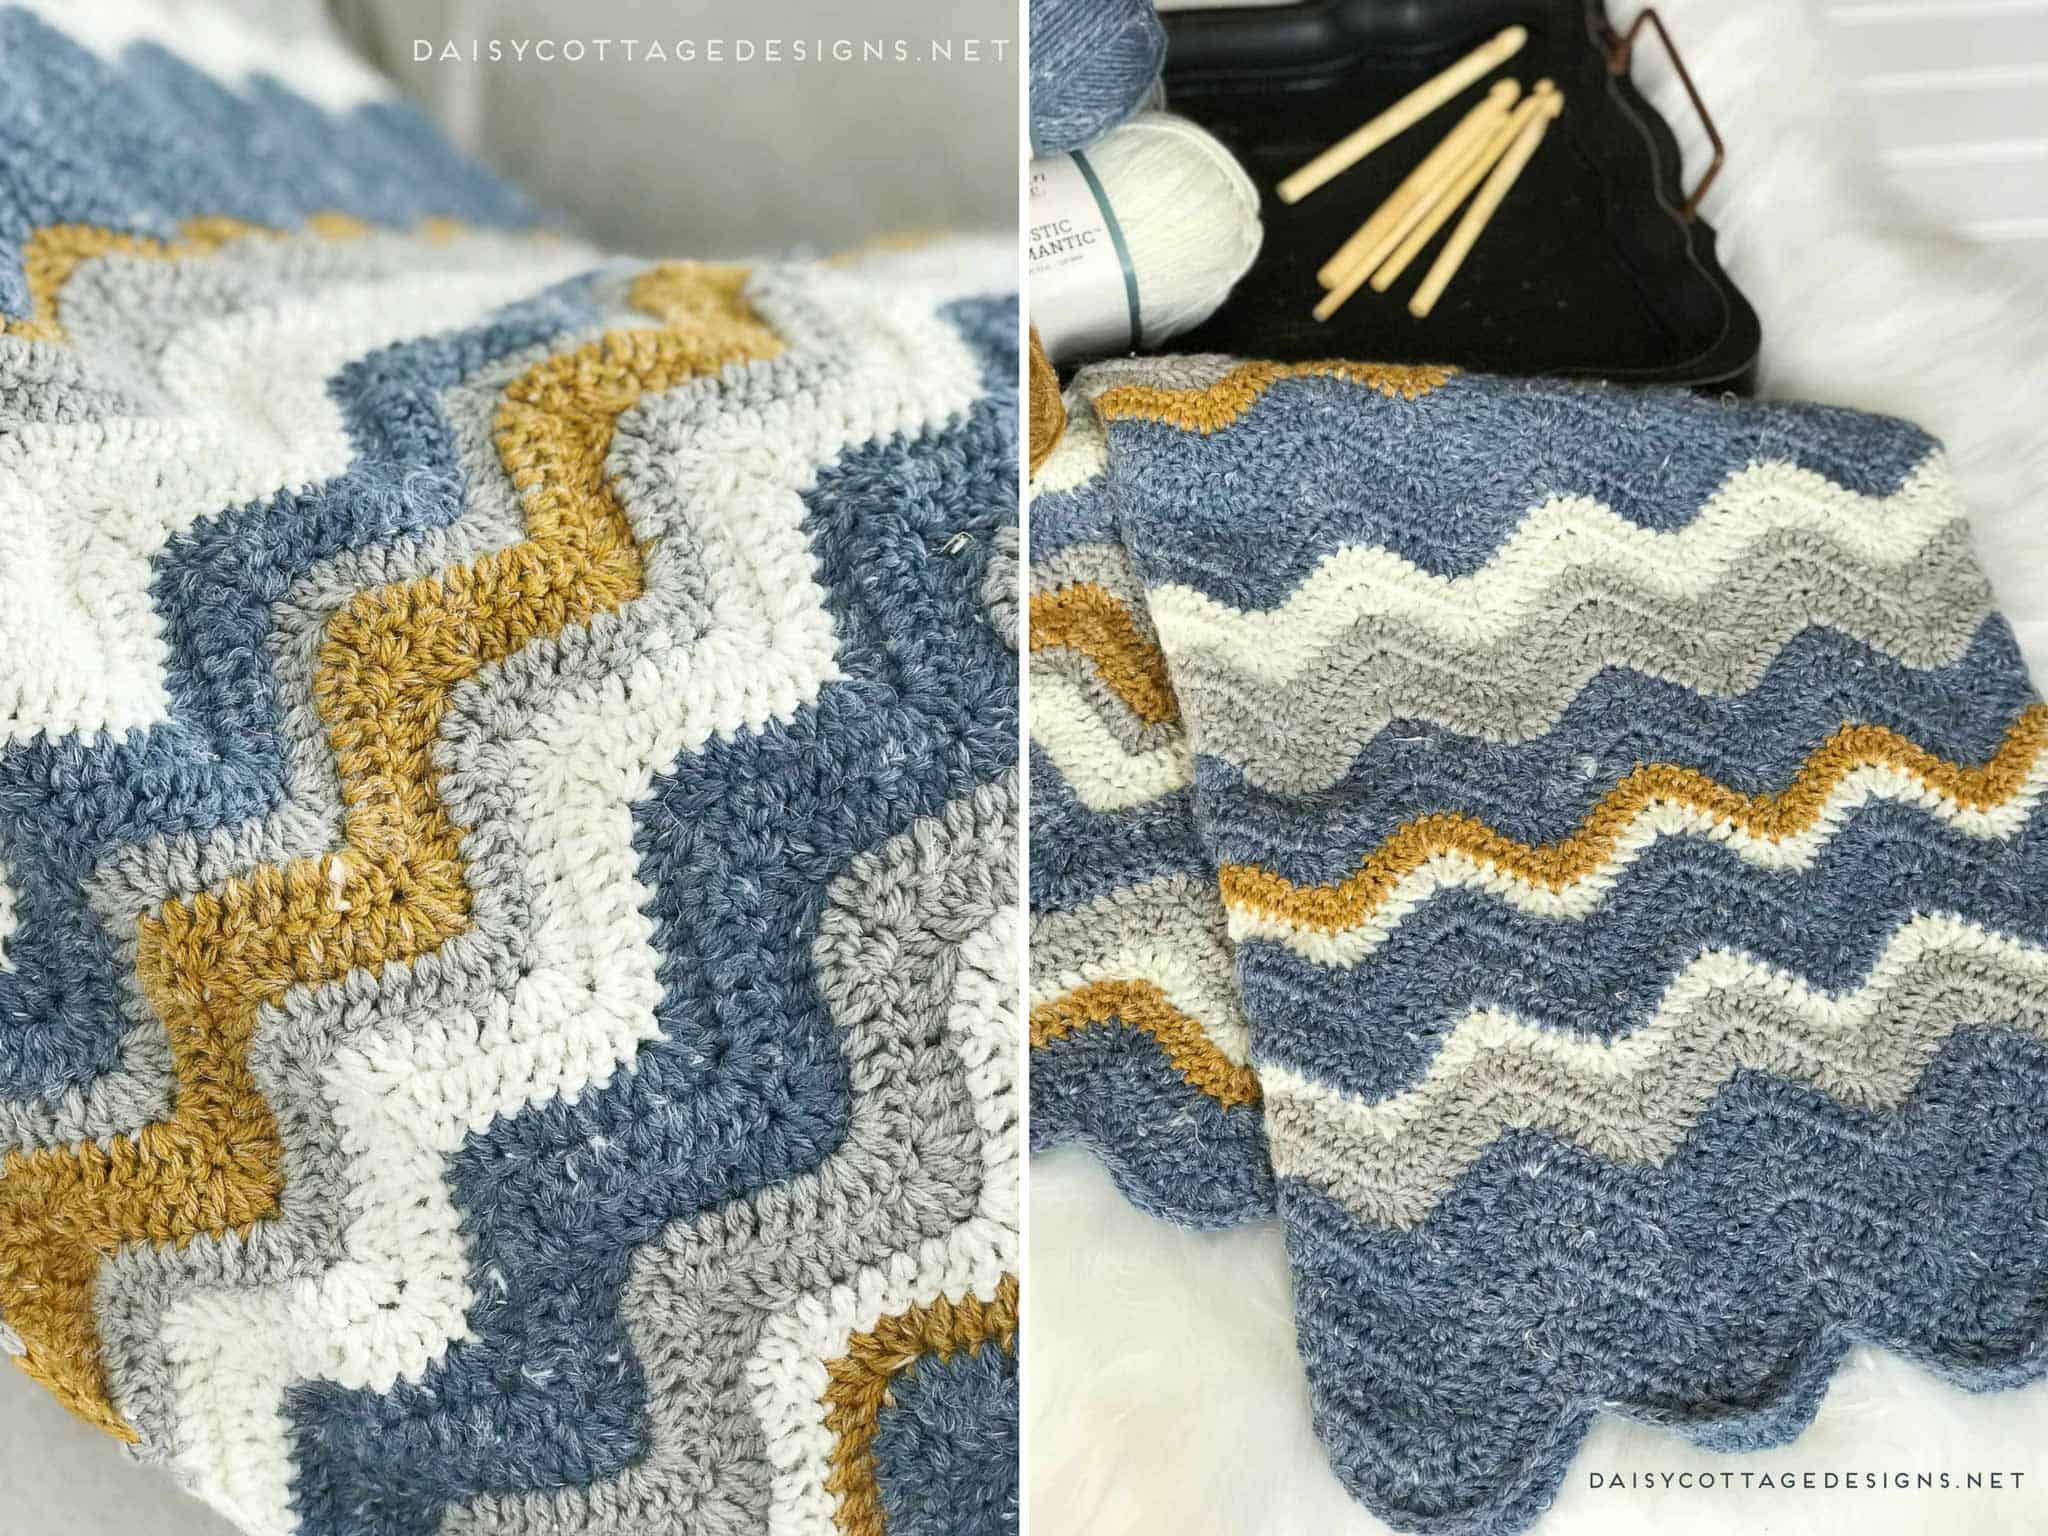 Use this chevron blanket crochet pattern from Daisy Cottage Designs to create a beautiful afghan in any size. | crochet bad blanket, crochet afghan pattern, easy crochet pattern, free crochet pattern, ripple crochet pattern